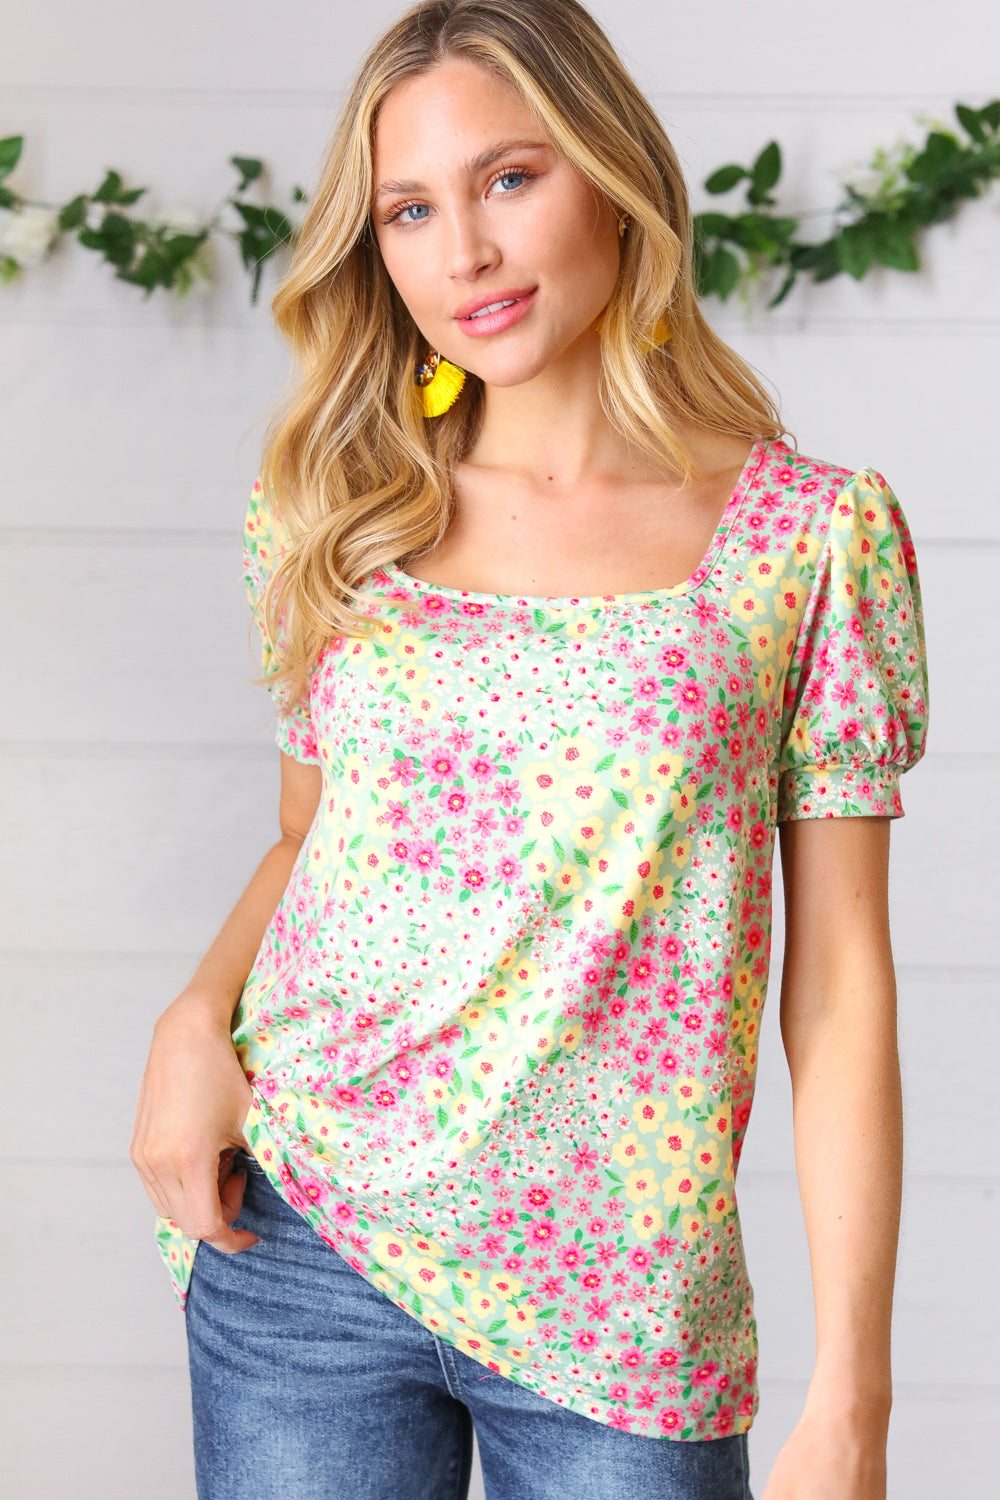 Canary/Mint Floral Square Neck Bubble Sleeve Top - Sybaritic Bags & Clothing